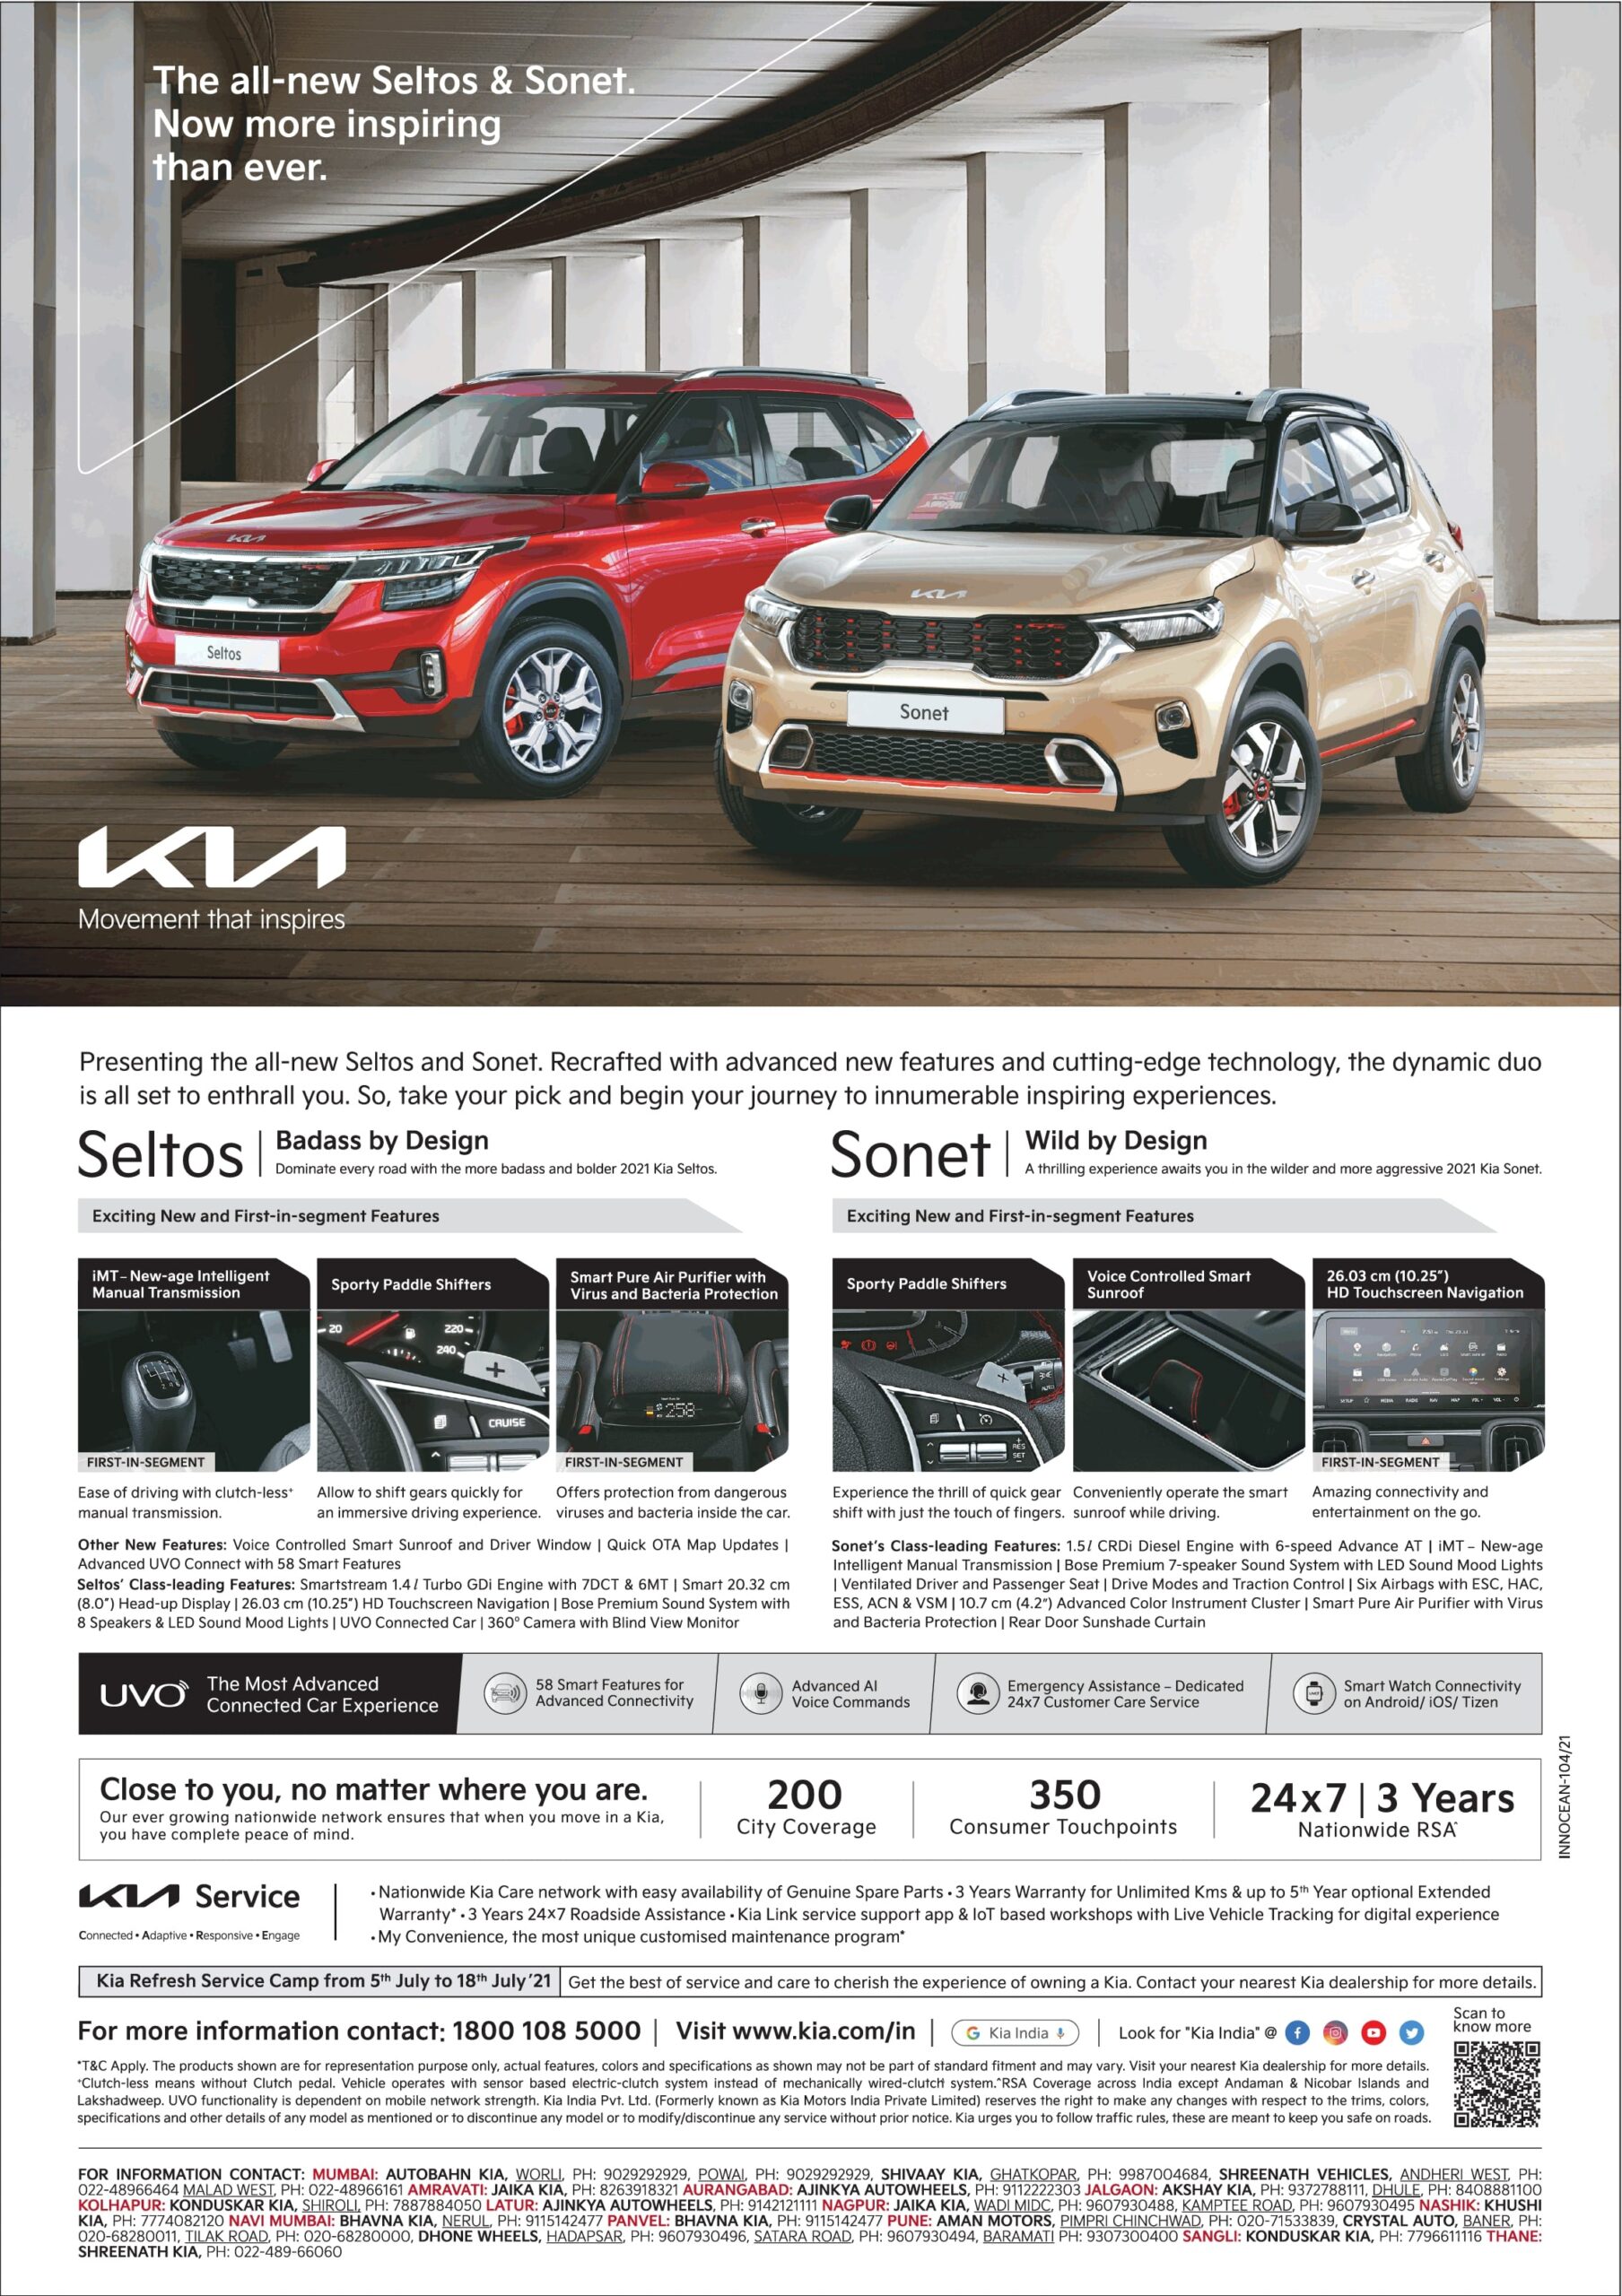 kia-the-all-new-seltos-and-sonet-now-more-inspiring-than-ever-ad-times-of-india-mumbai-03-07-2021